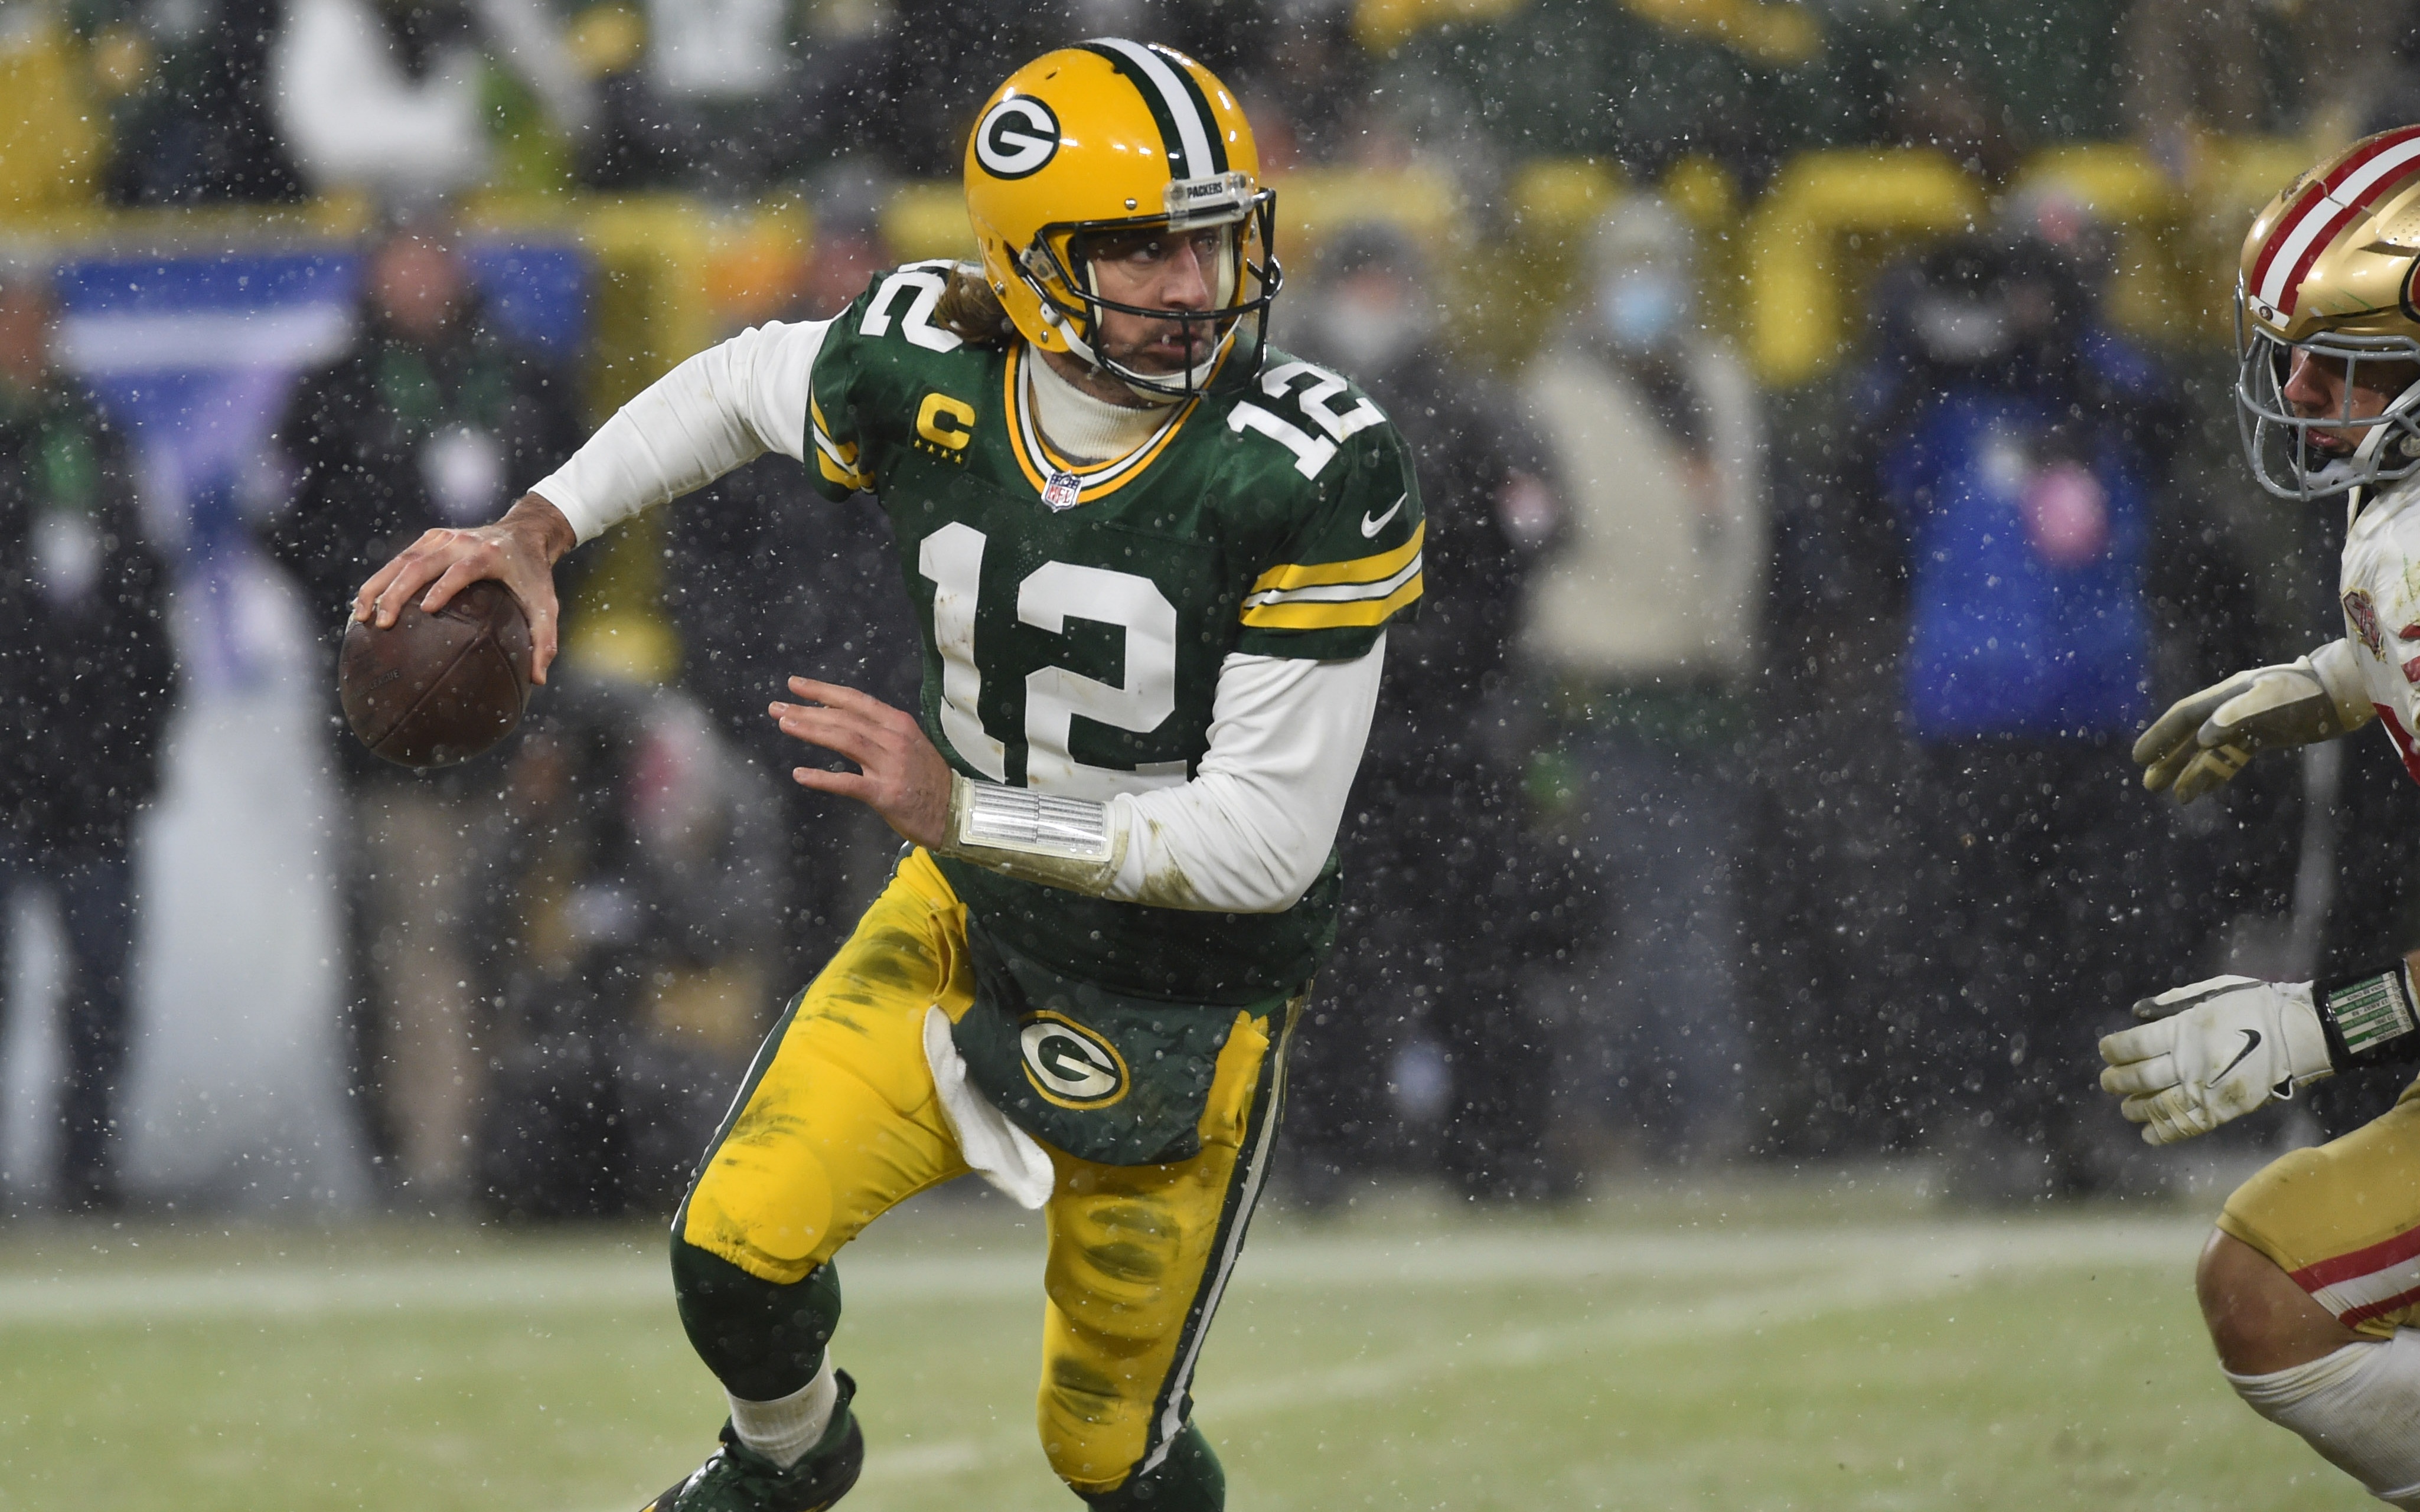 Rodgers rolls out. Credit: Jeffrey Baker, USA TODAY Sports.